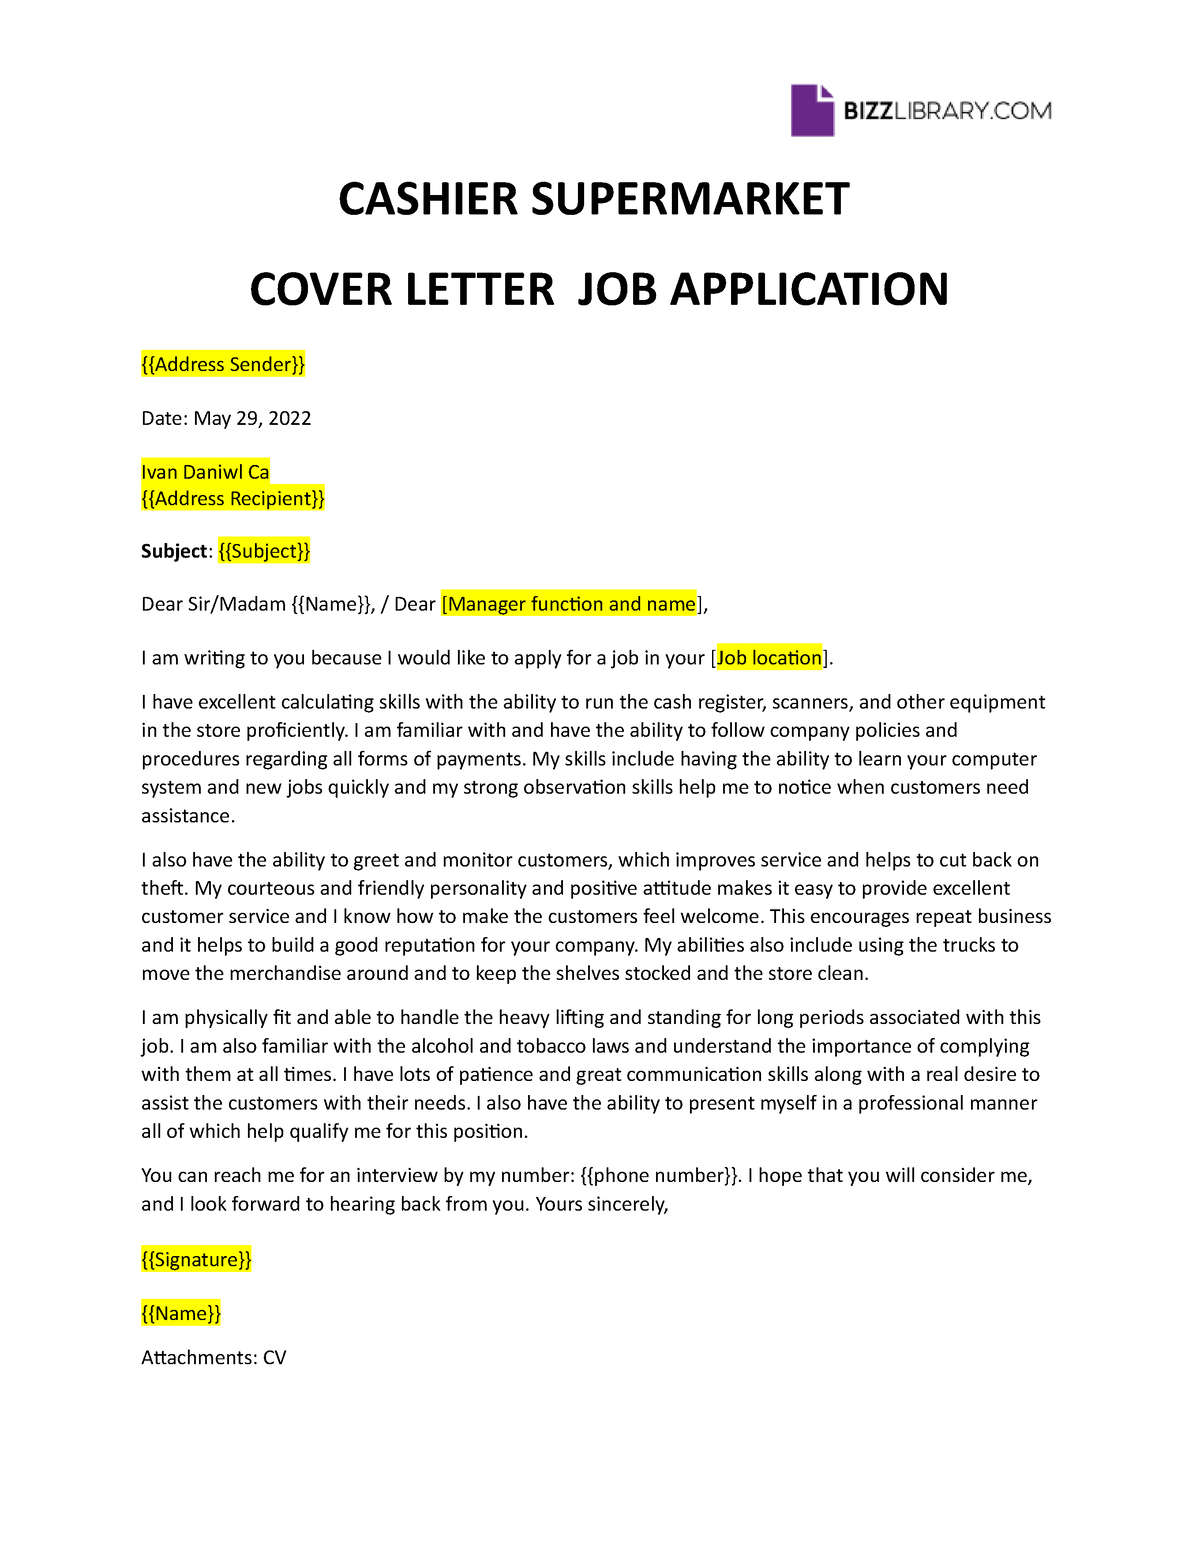 examples of application letters for supermarket